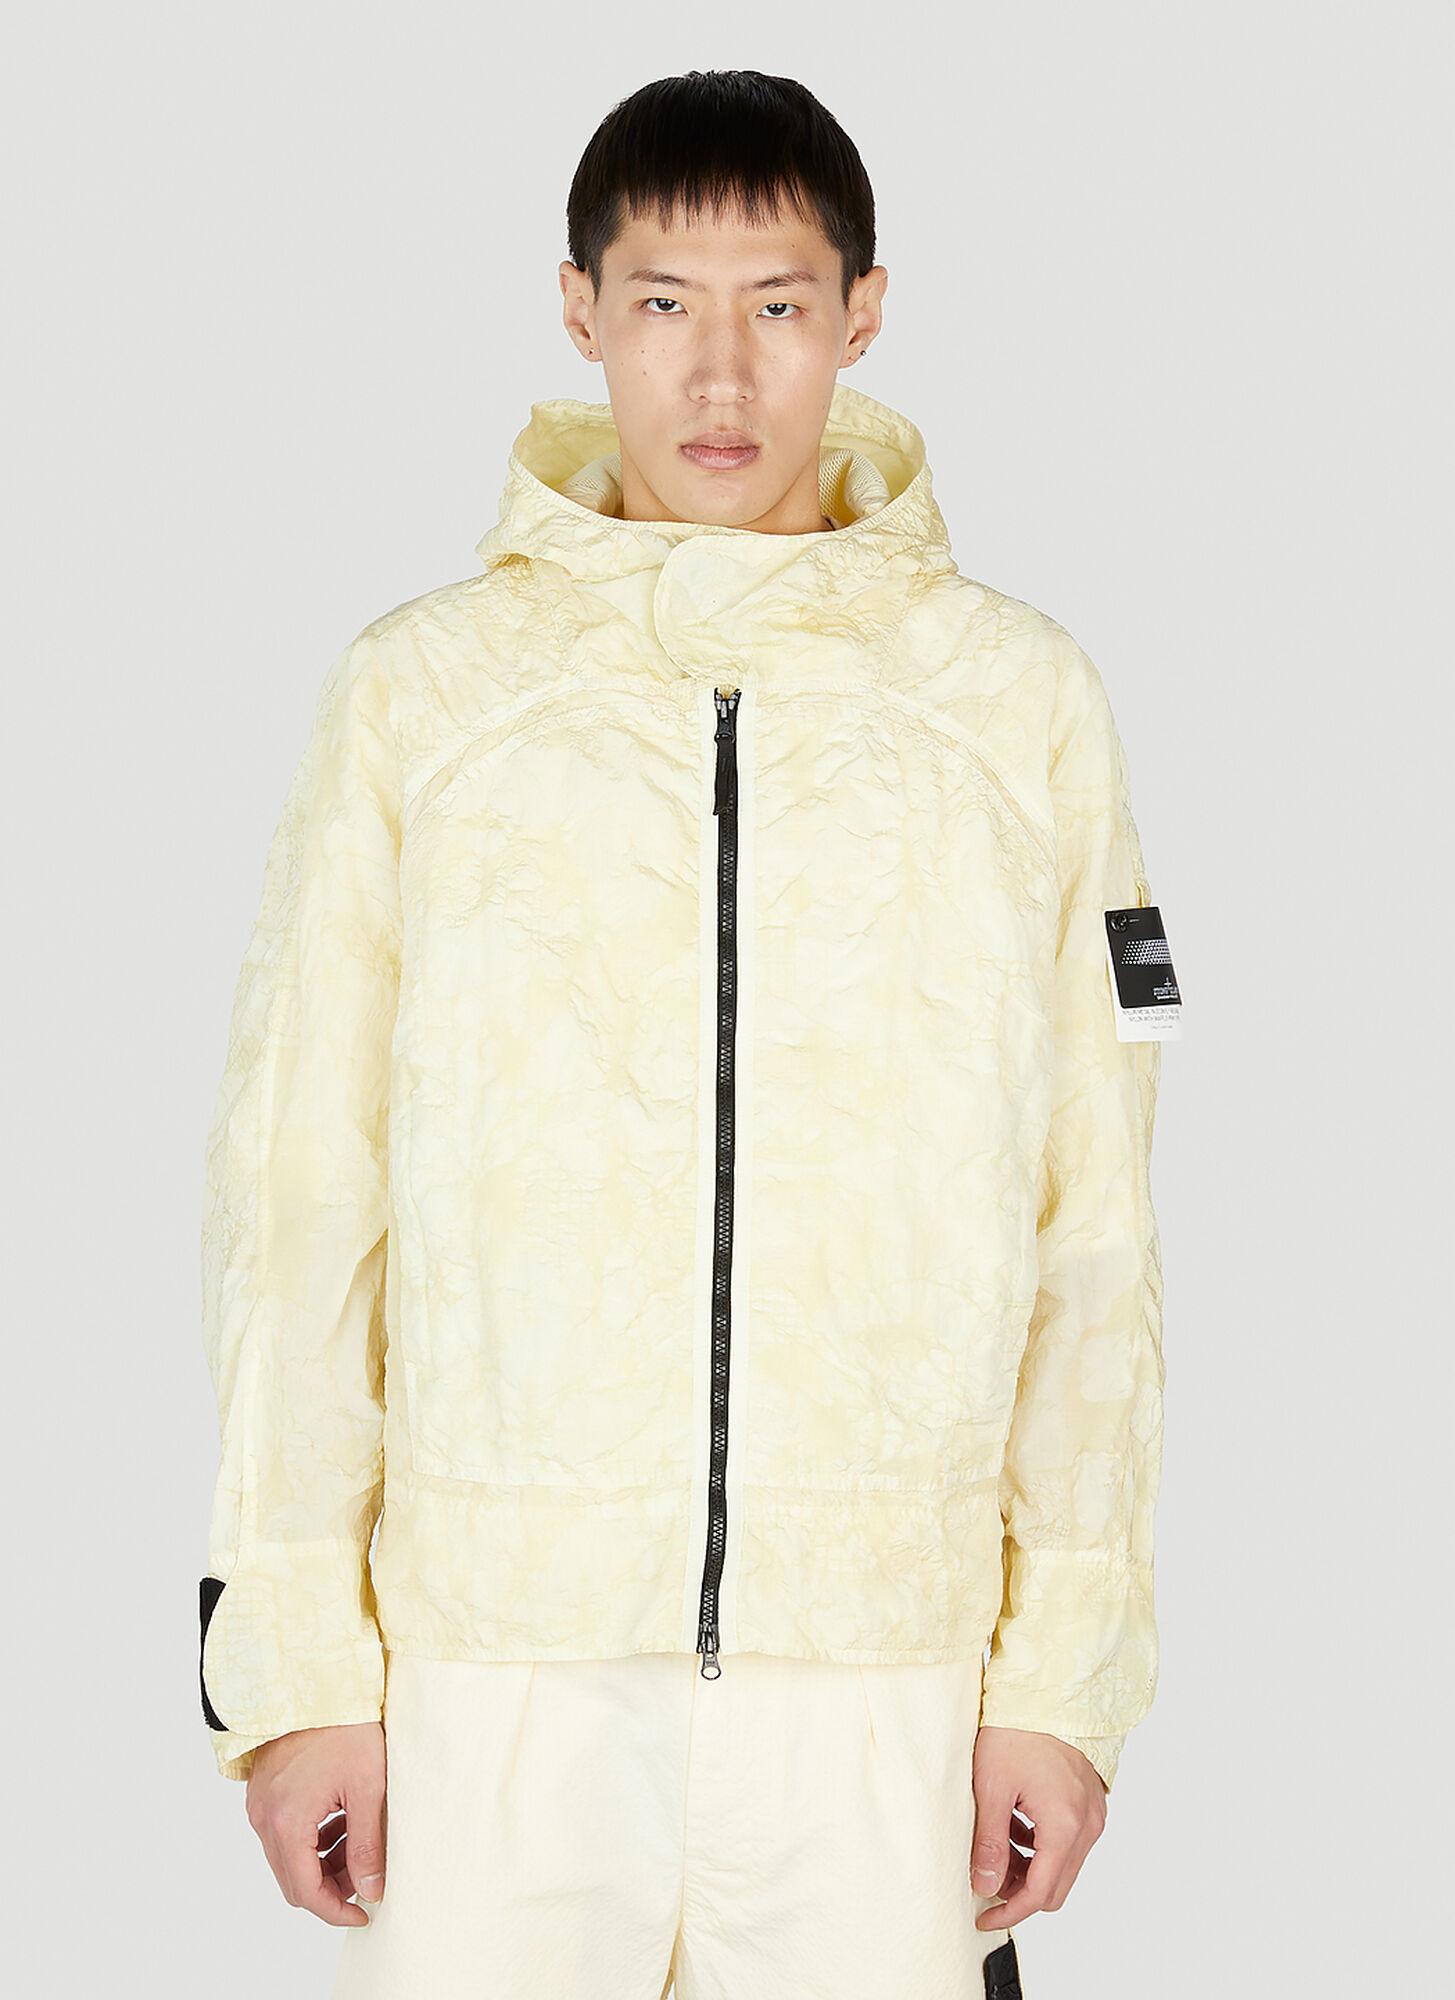 Stone Island Shadow Project Crinkled Parka Jacket in Natural for Men | Lyst